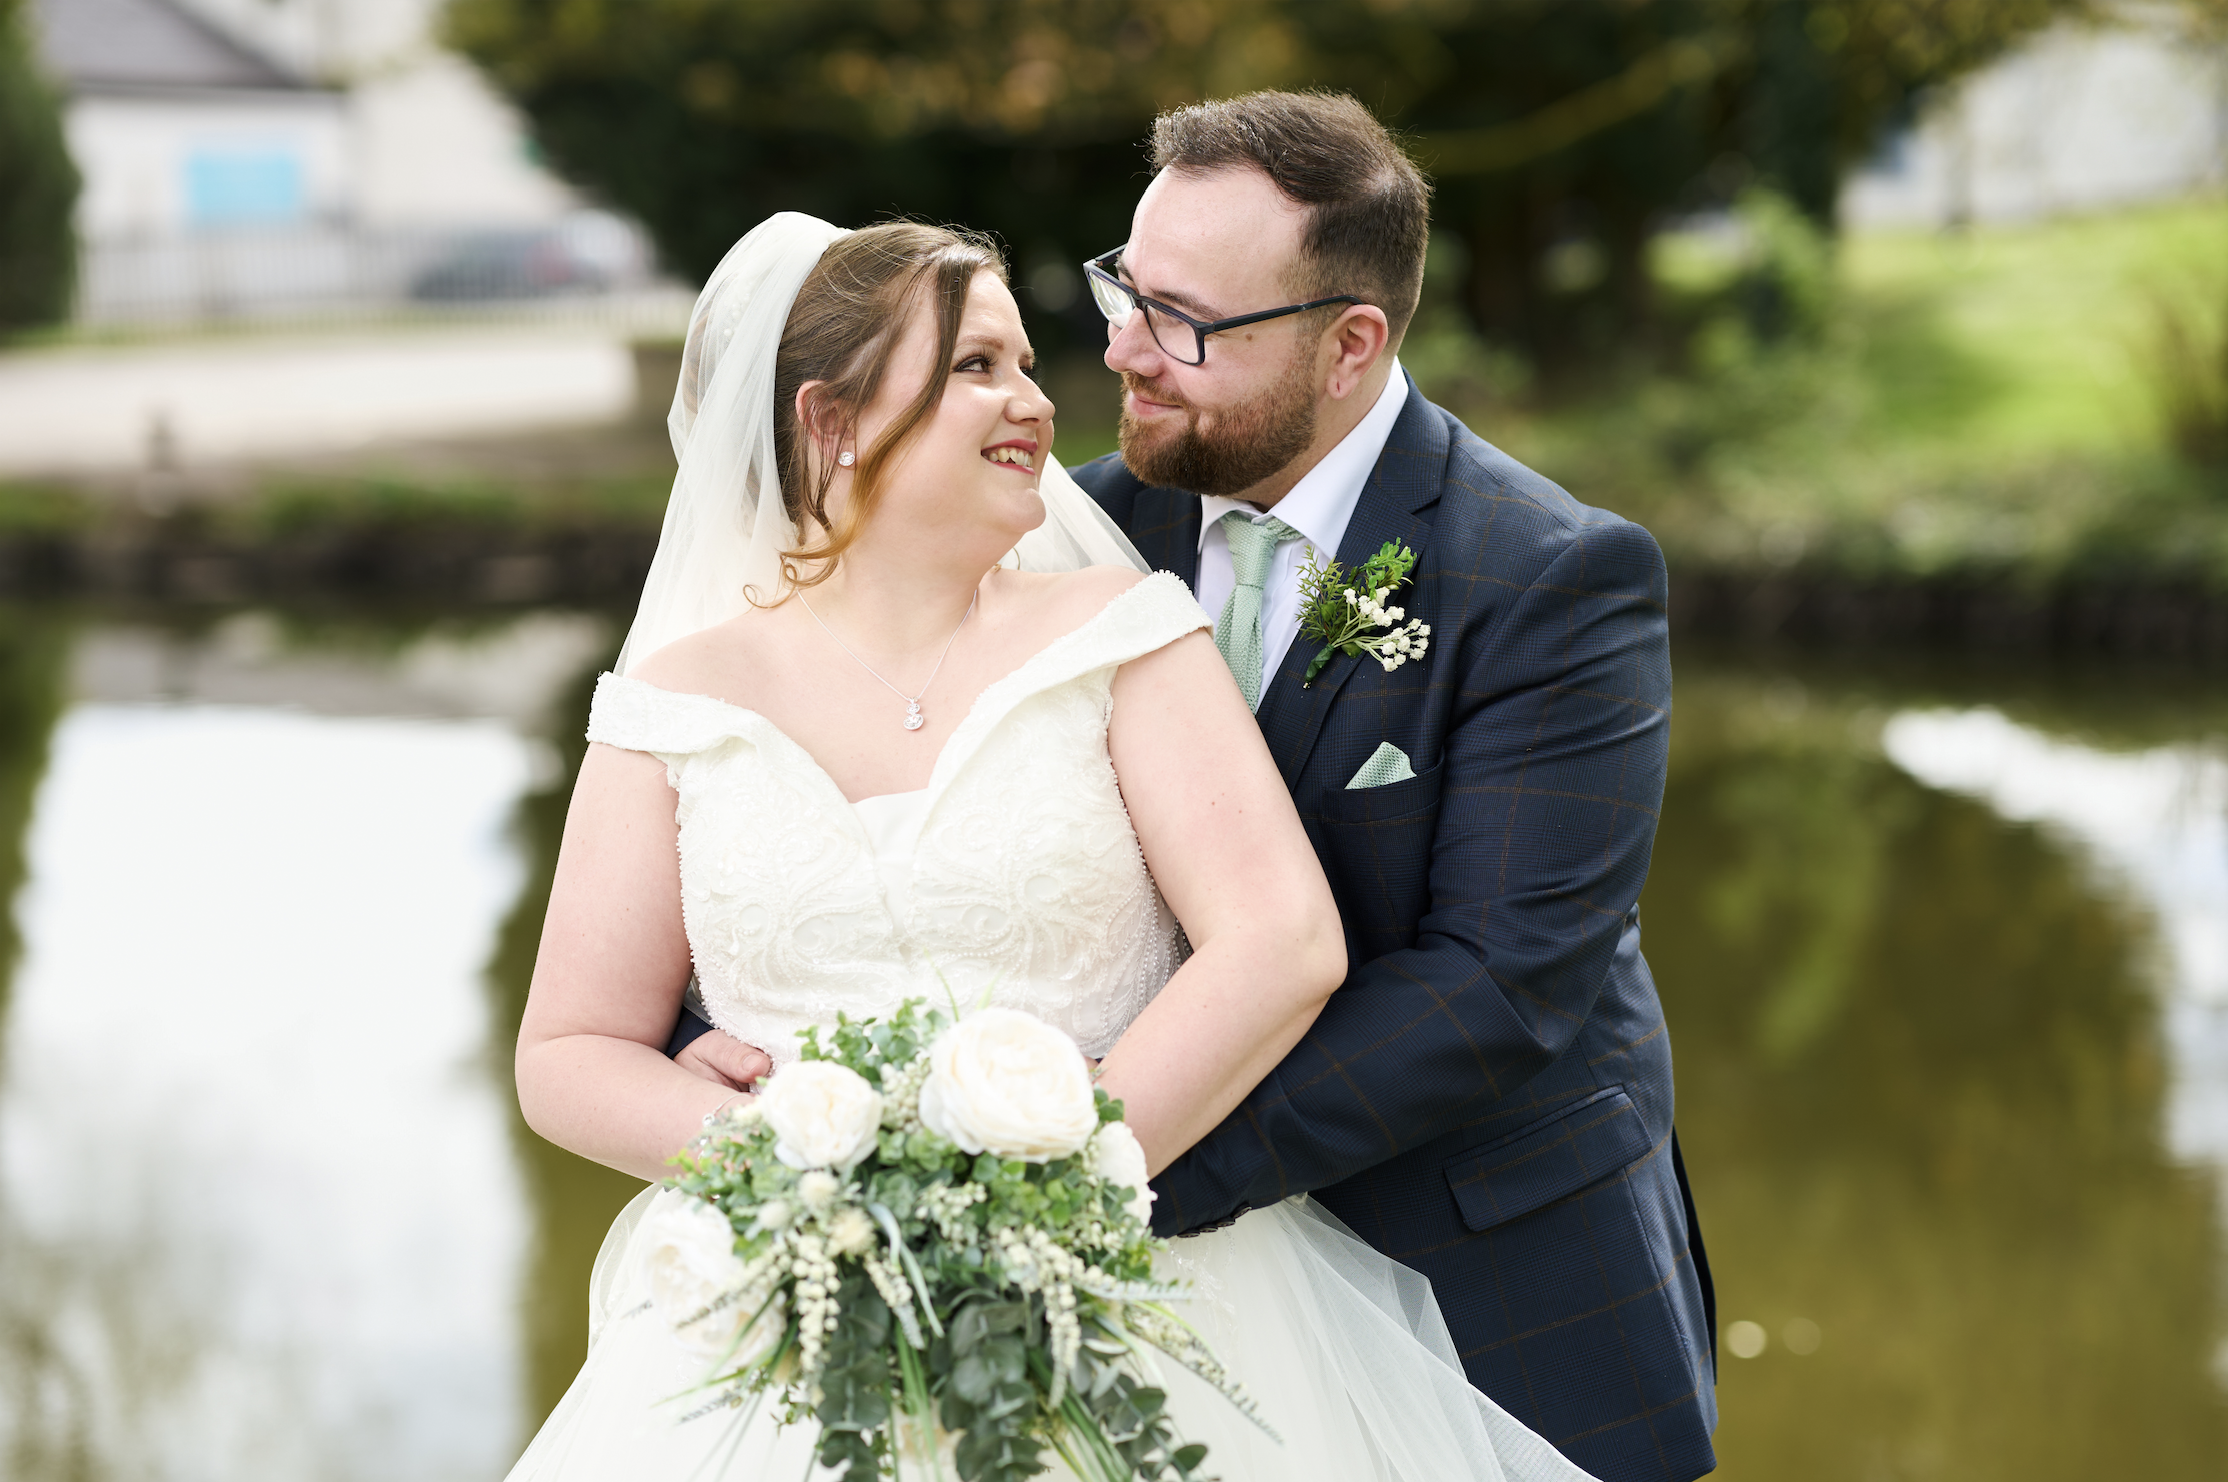 Grace and Michael's Wedding in Bury, Greater Manchester